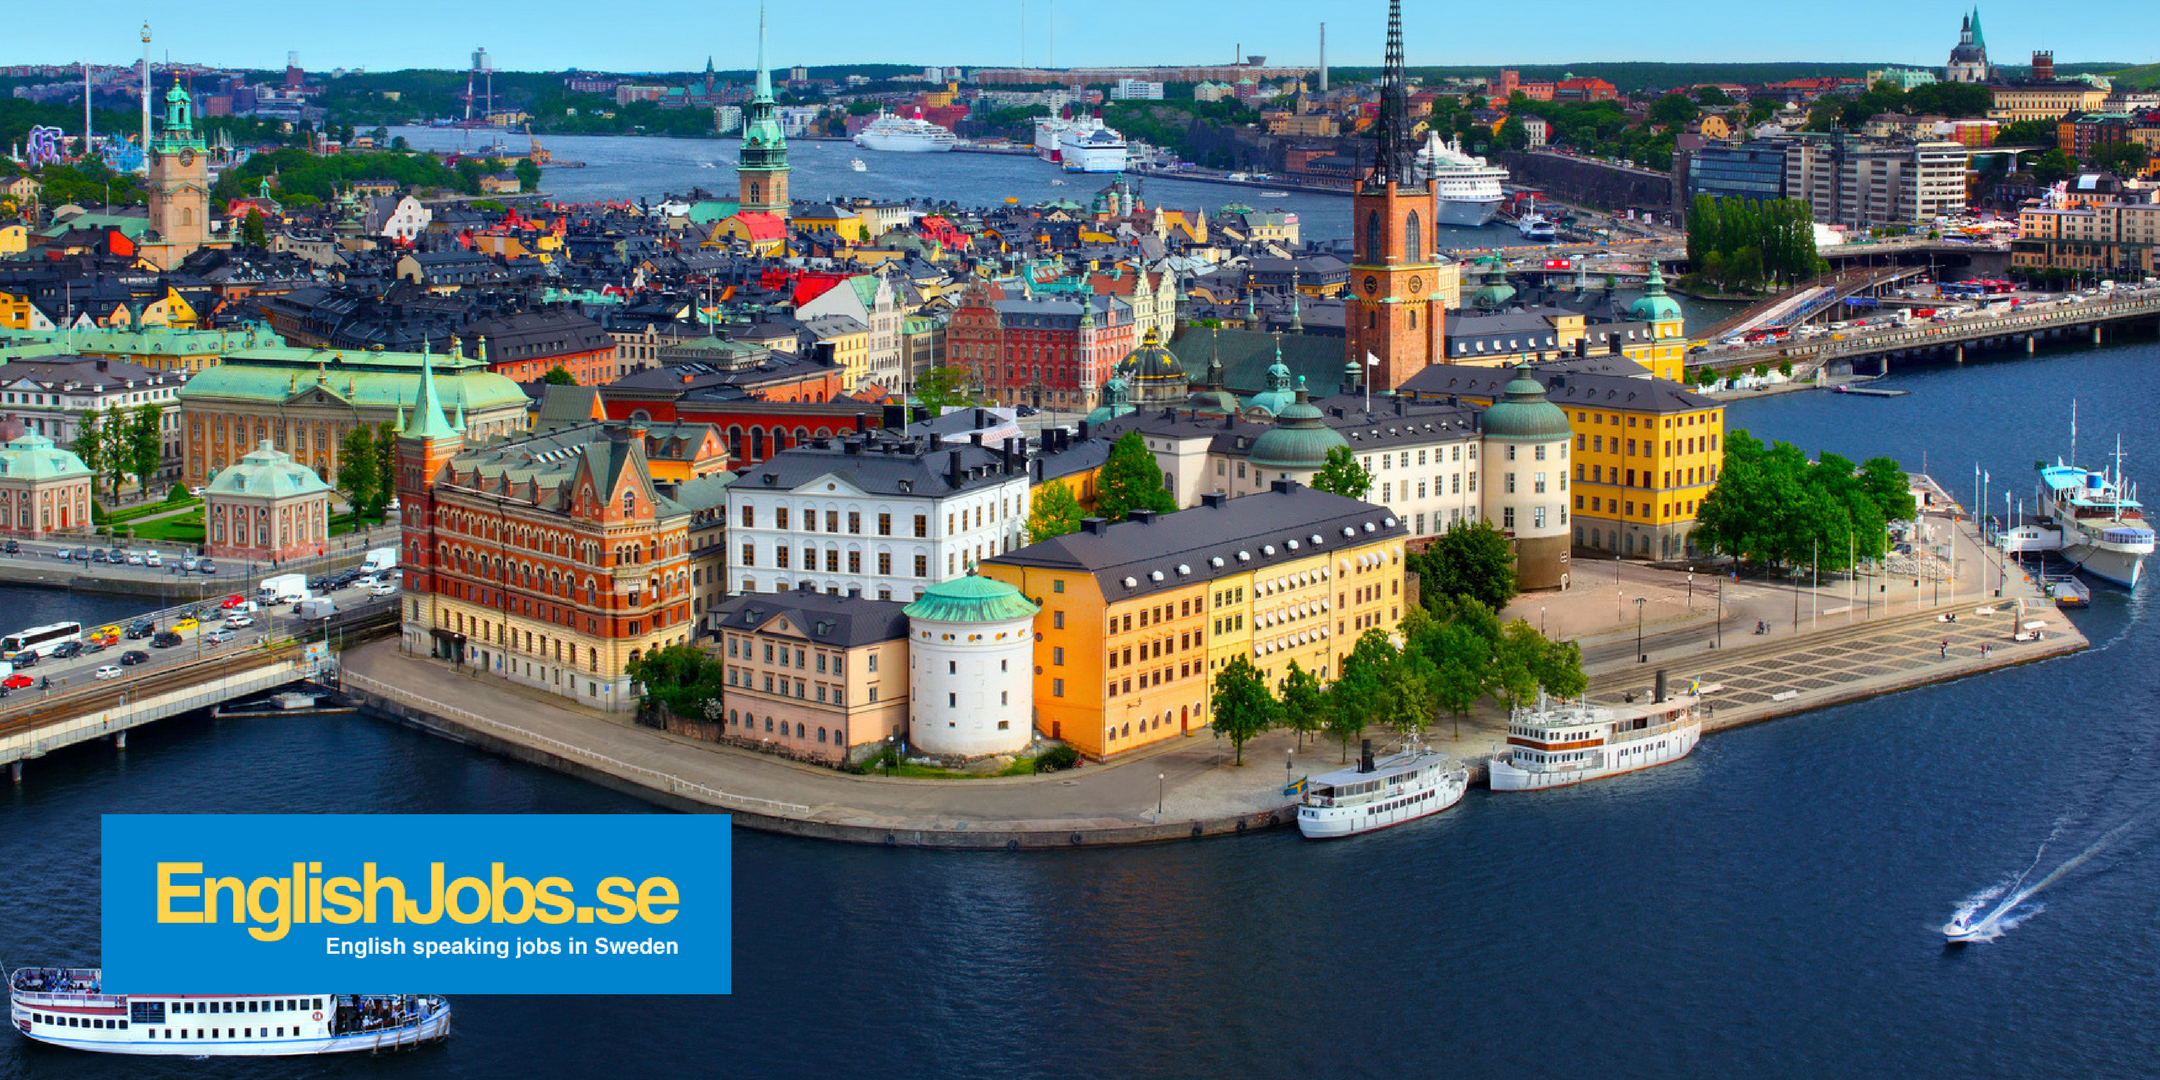 Work in Europe (Sweden, Denmark, Germany) - Your job search from Philadelphia to Stockholm